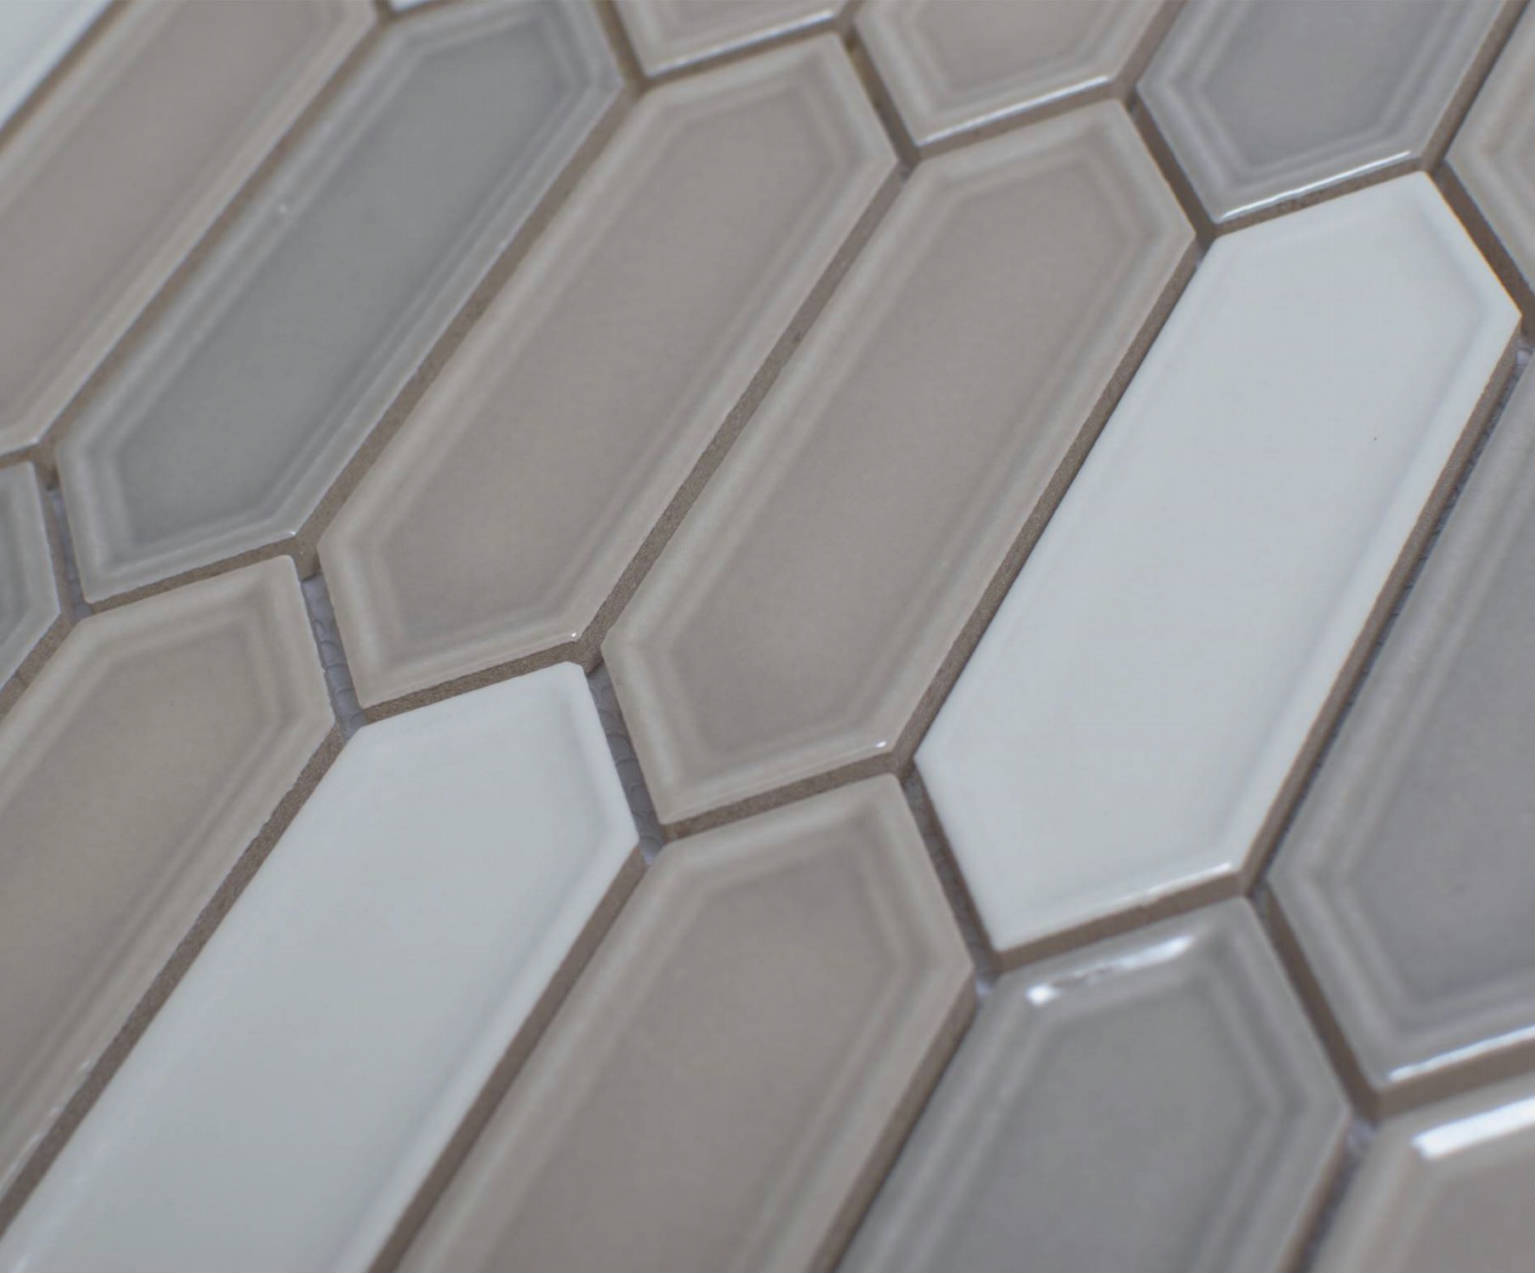 QSSPK-020304 | Stones And More | Finest selection of Mosaics, Glass, Tile and Stone